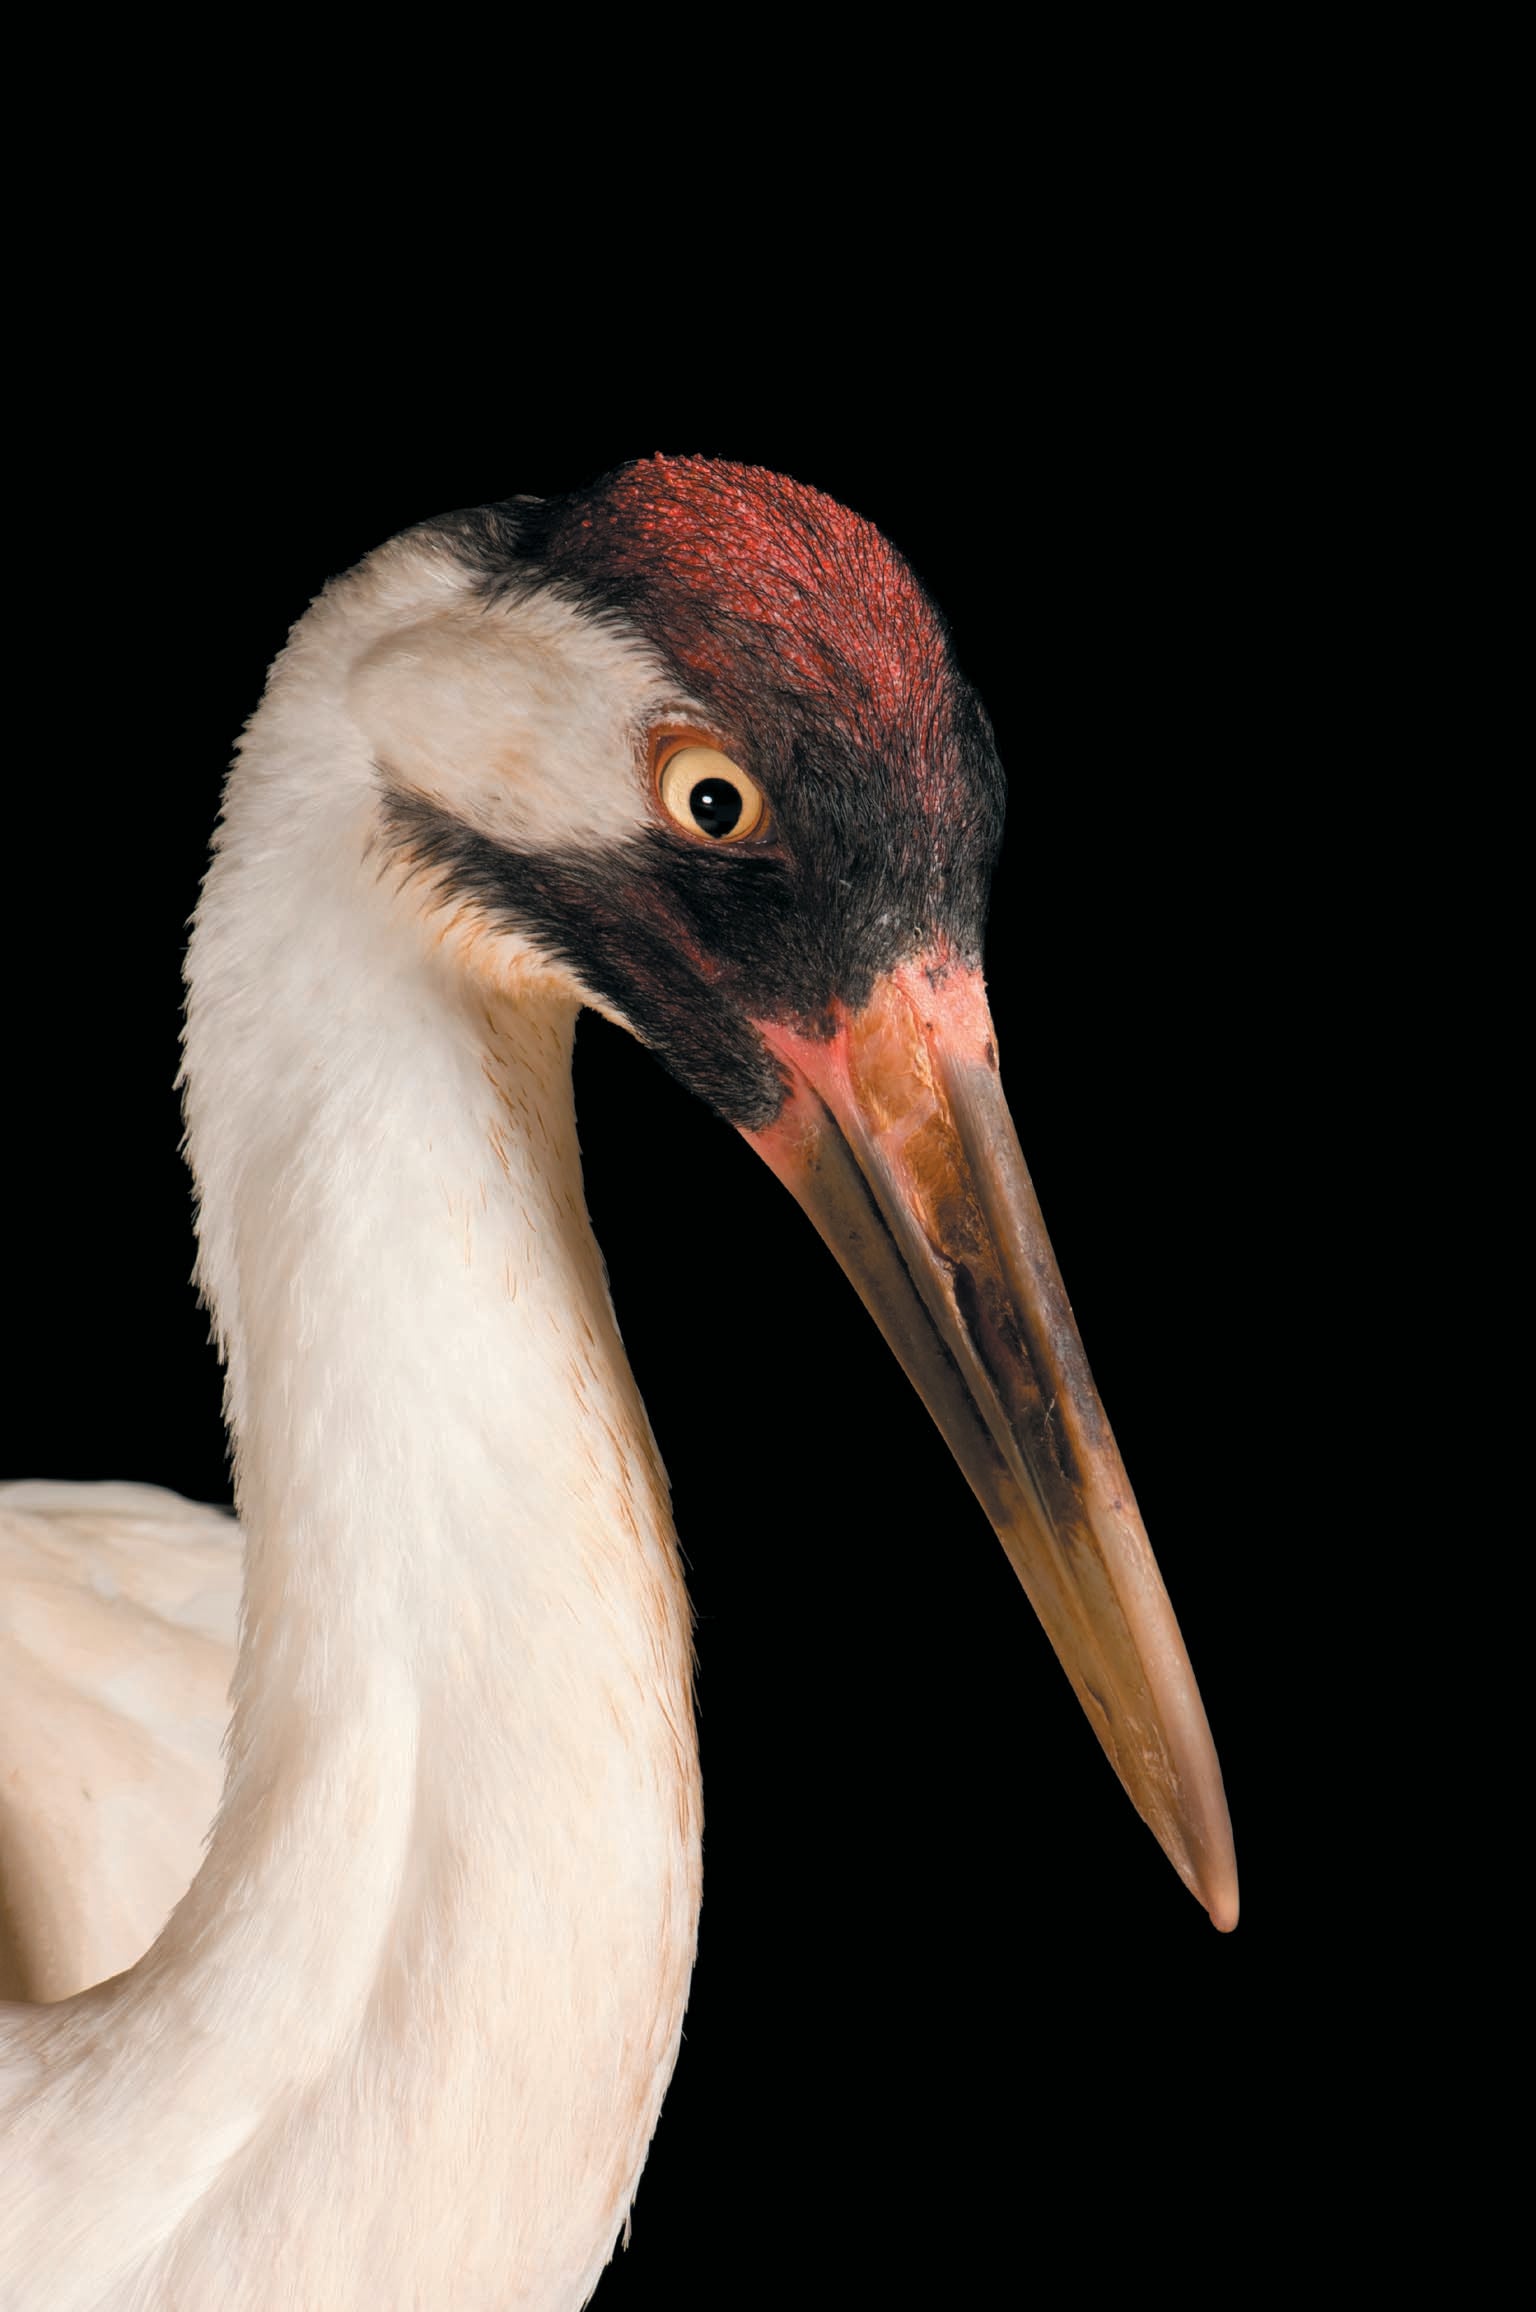 A white bird with a red and brown head and a long black and yellow beak shown against a black background.